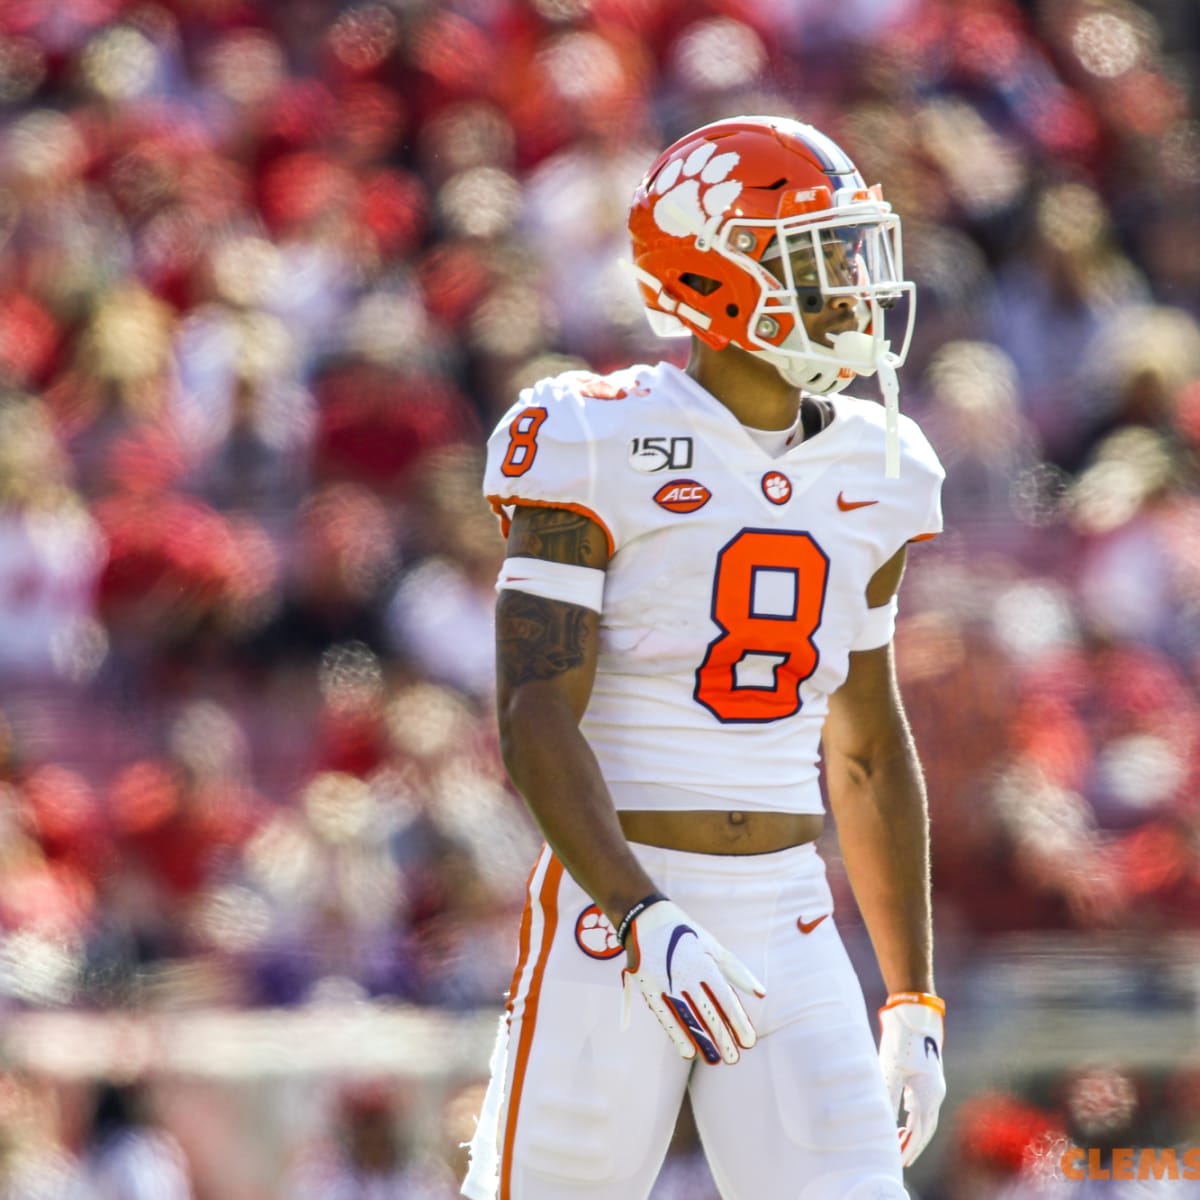 Clemson cornerback AJ Terrell 8 during the NCAA college football game  between Wake Forest and Clemson on Saturday October 7 2017 at Memorial  Stadium in Clemson SC Jacob KupfermanCSM Cal Sport Media